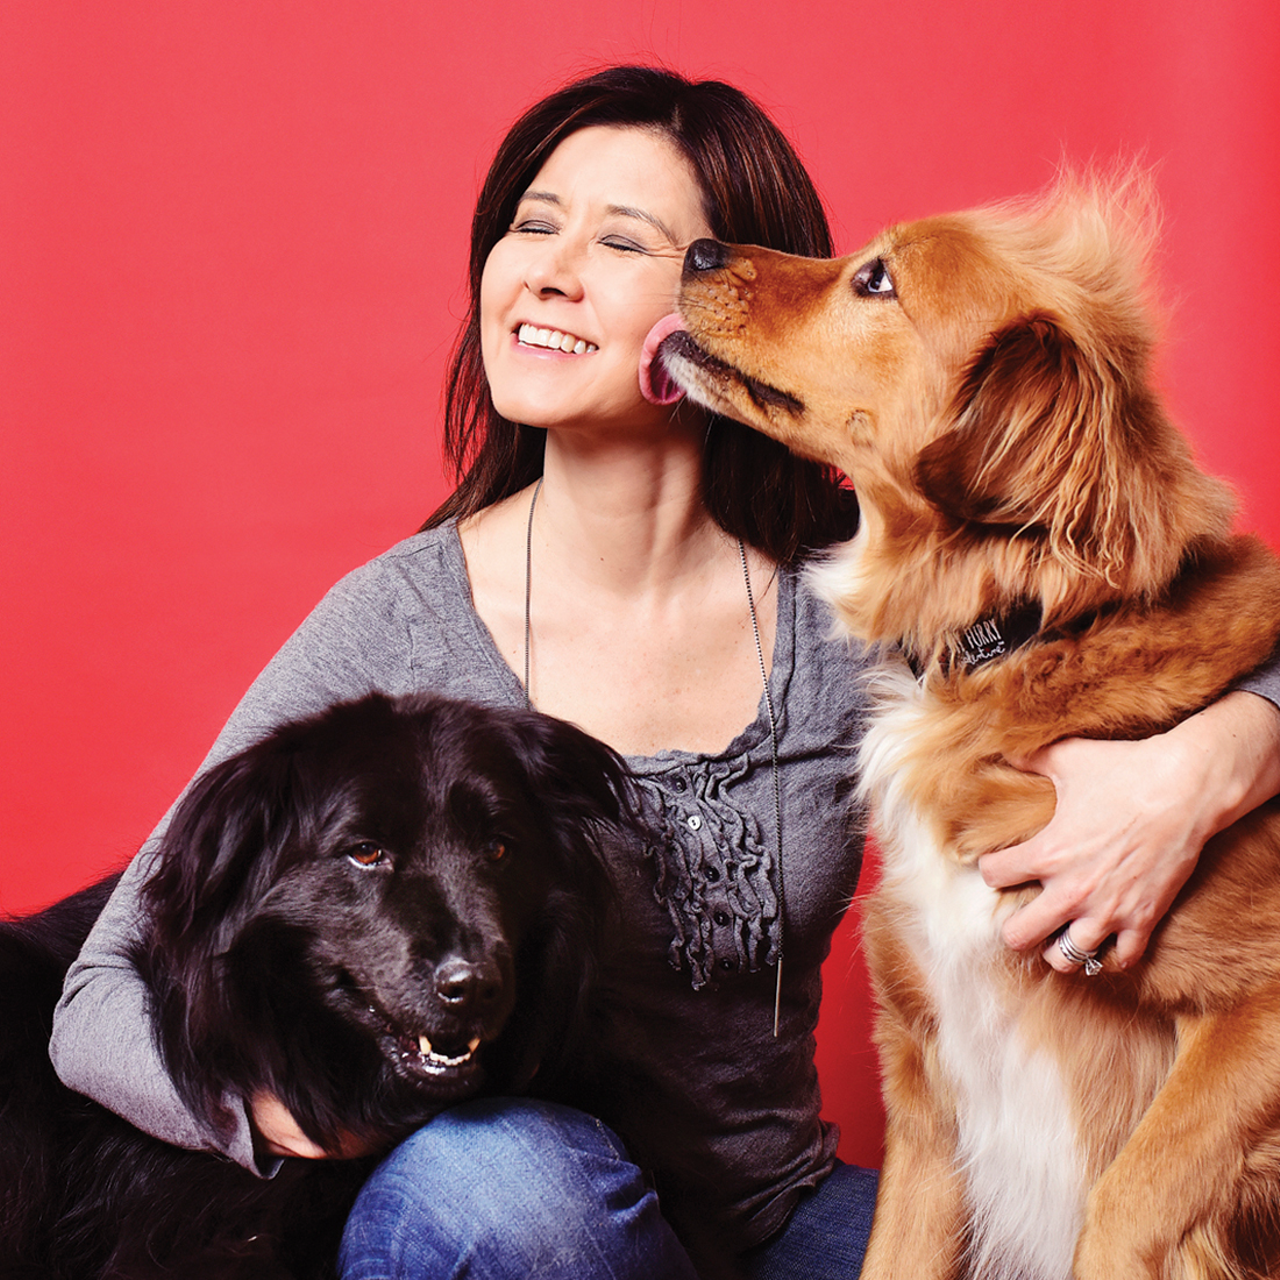 Carolyn Evans, founder of My Furry Valentine and owner of PhoDOGrapher pet photography studio